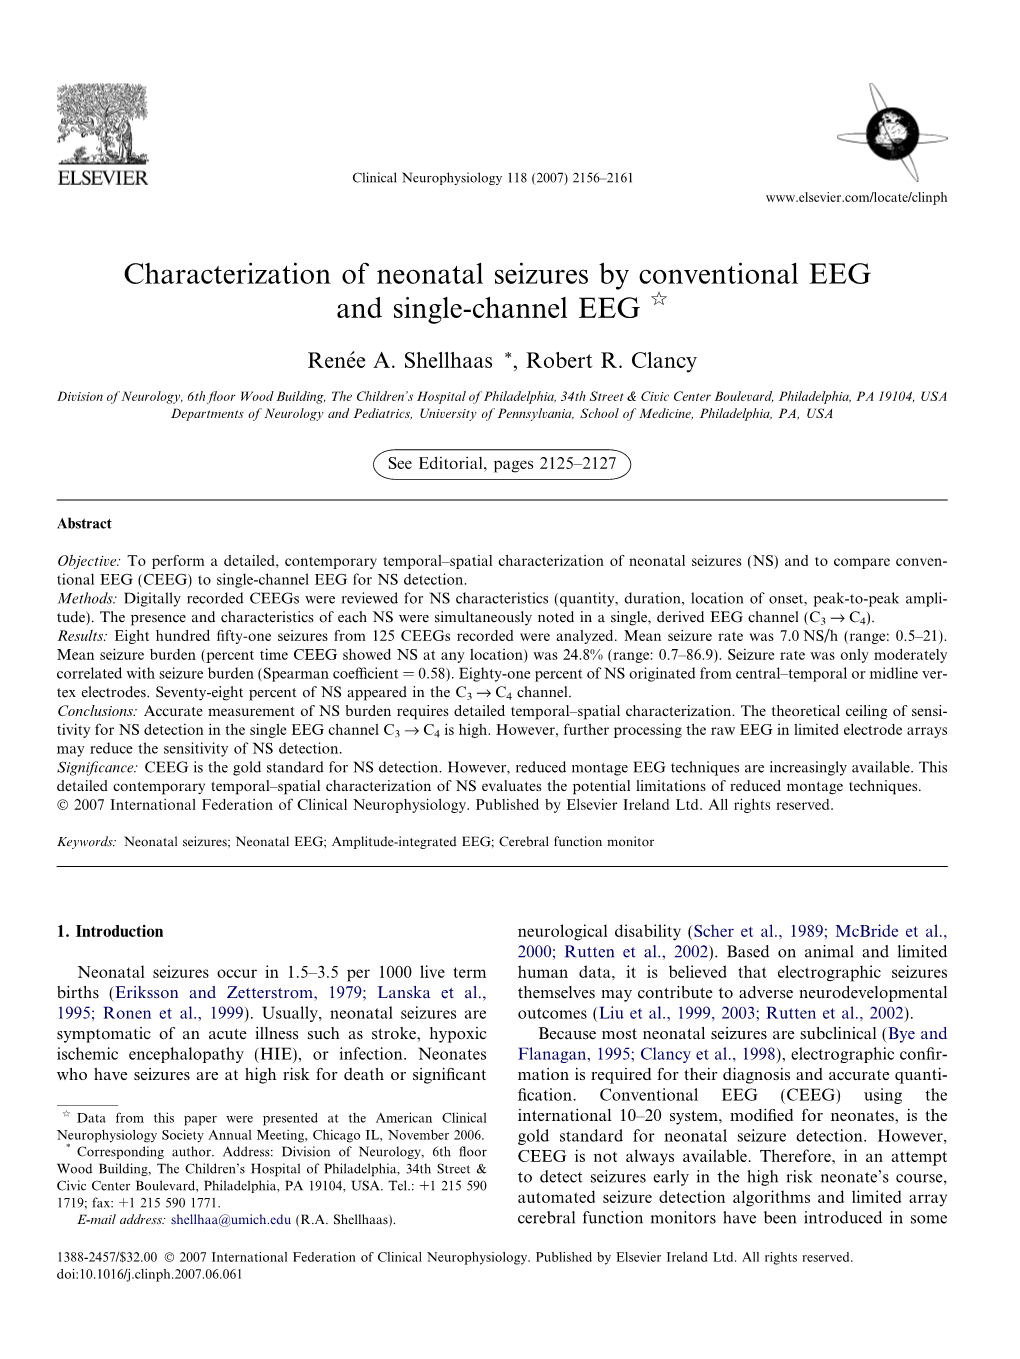 Characterization of Neonatal Seizures by Conventional EEG and Single-Channel EEG Q